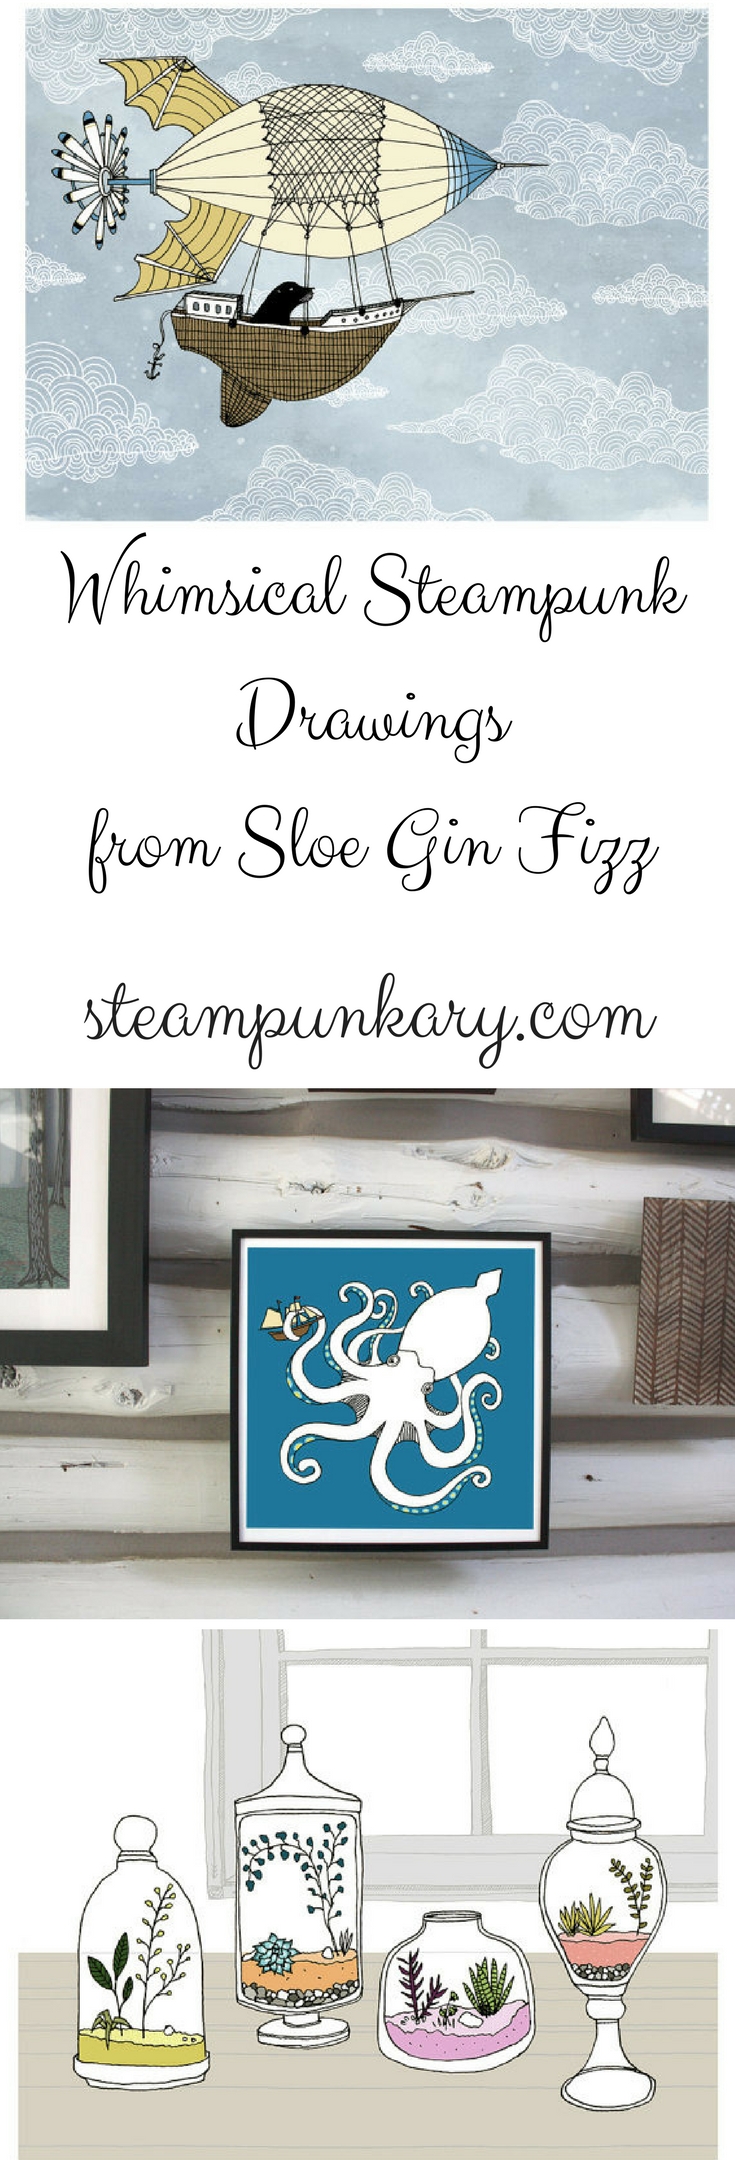 Whimsical Steampunk Drawings from Sloe Gin Fizz